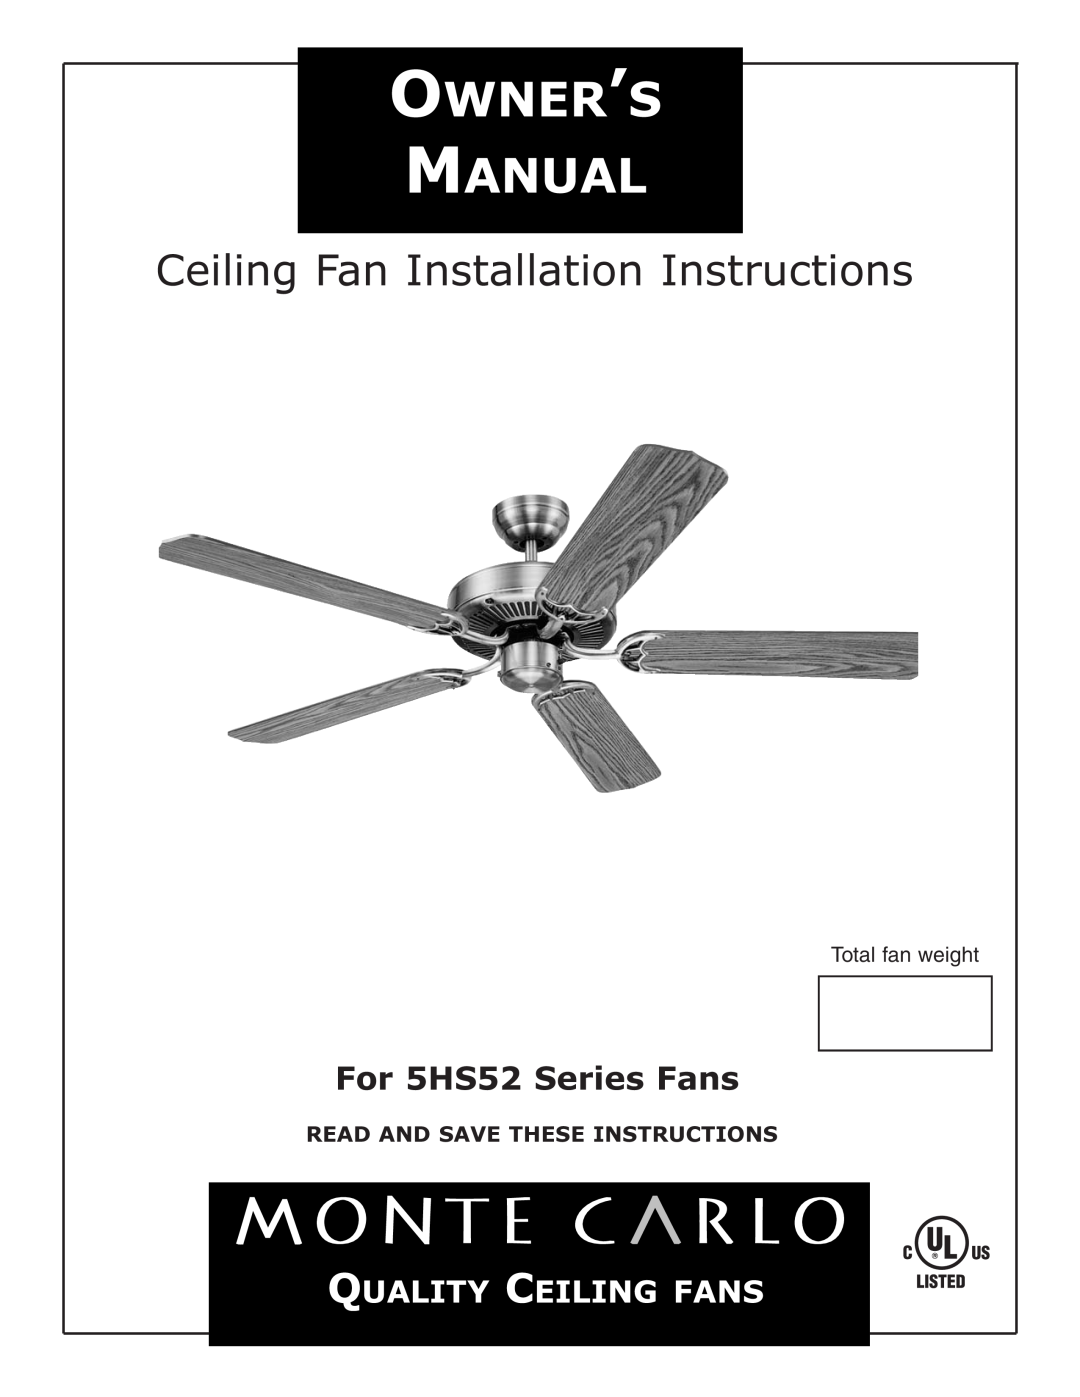 Monte Carlo Fan Company 5HS52 installation instructions Read And Save These Instructions, Owner’S Manual, Total fan weight 